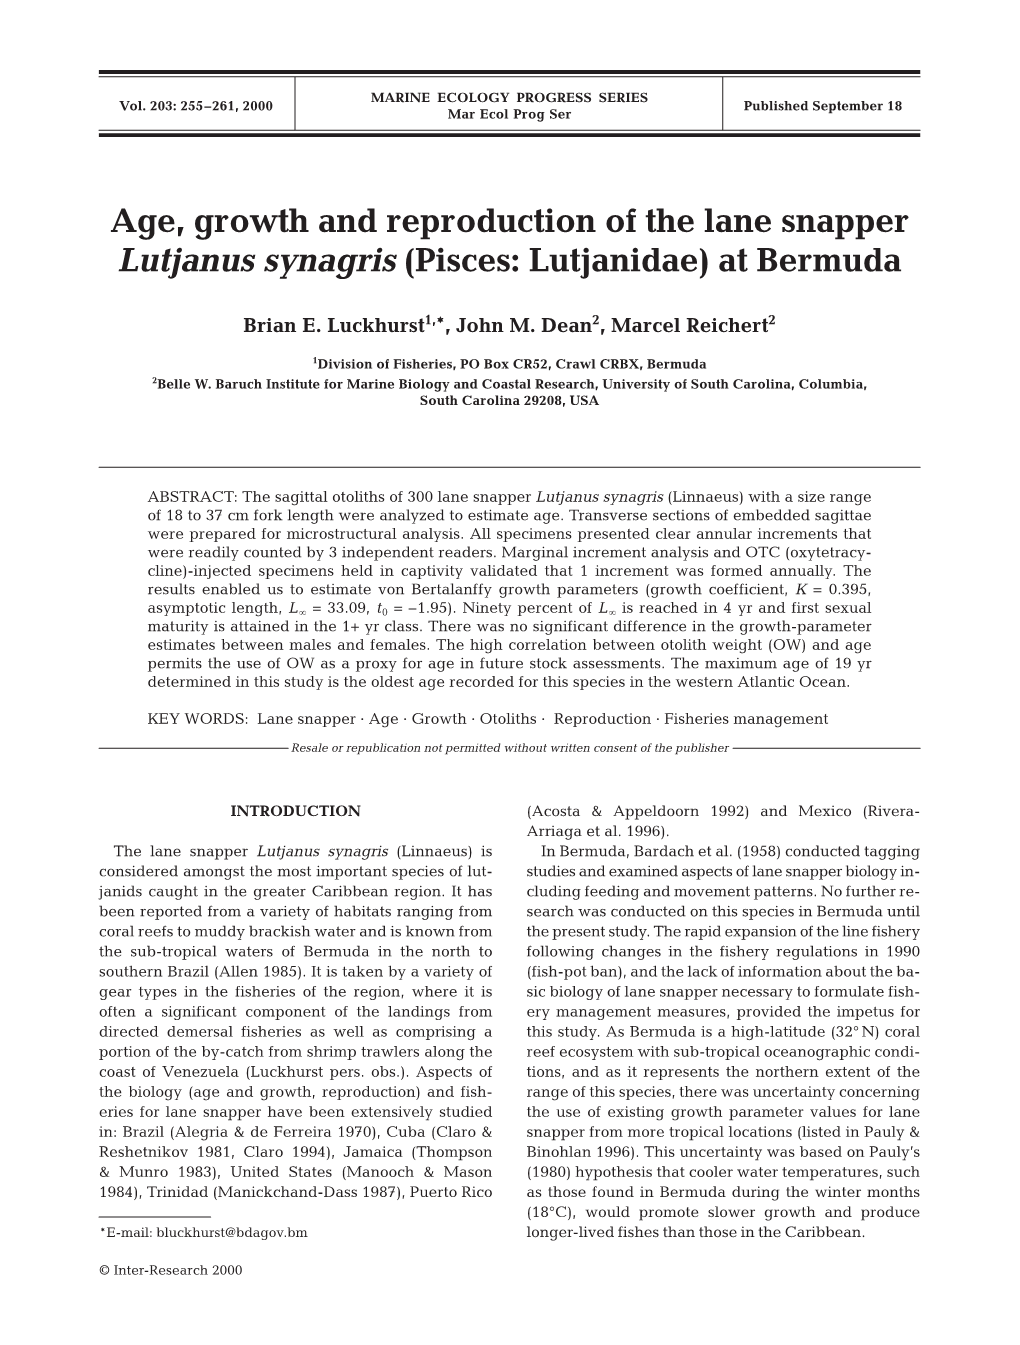 Age, Growth and Reproduction of the Lane Snapper Lutjanus Synagris (Pisces: Lutjanidae) at Bermuda